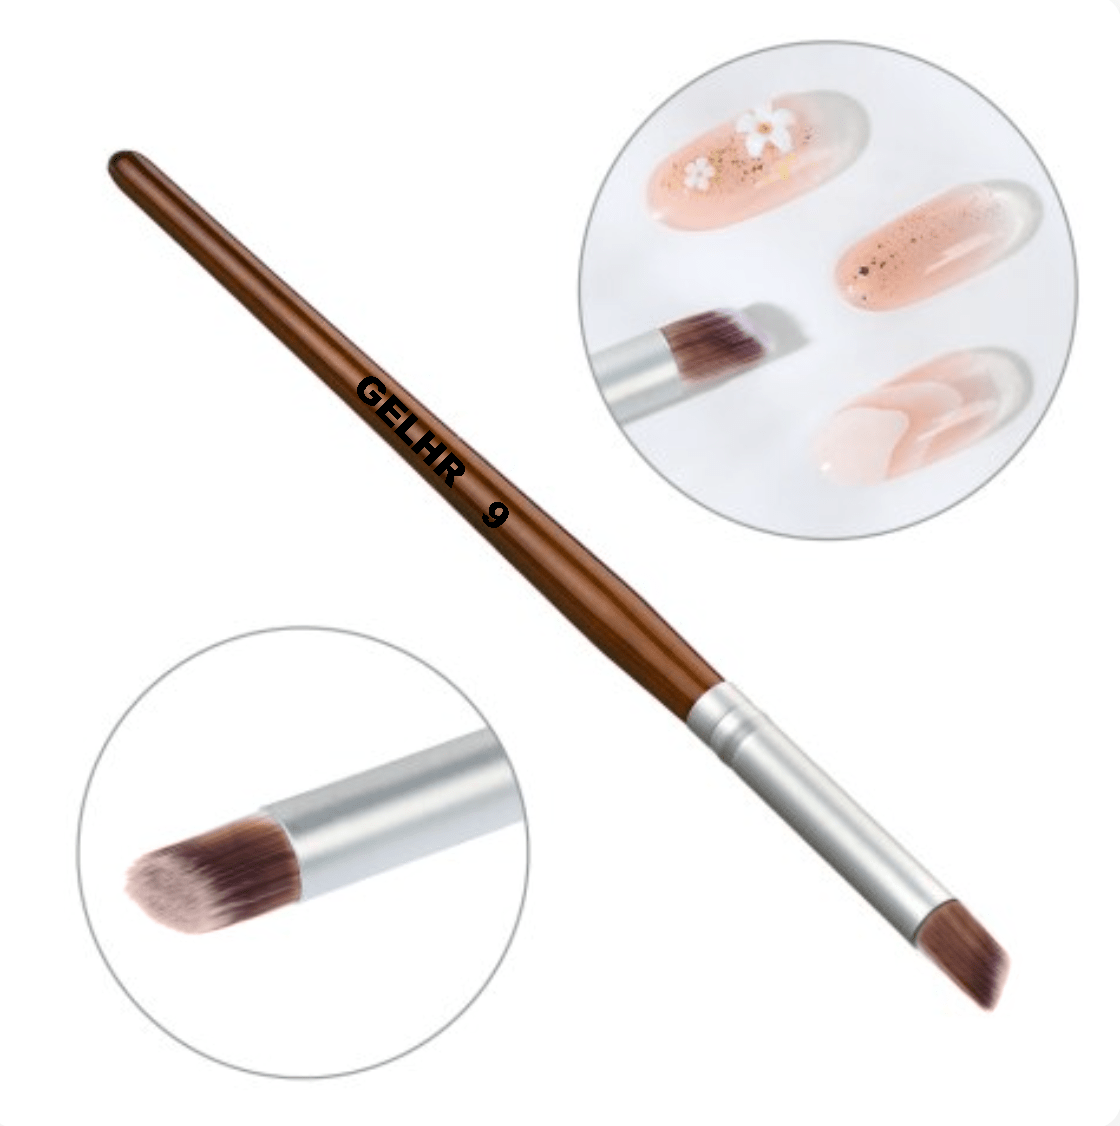 GELHR Nail Art Brush Ombre Powder, Gel, One Stroke Painting Brush (Lid included) (SET OF 3pcs)